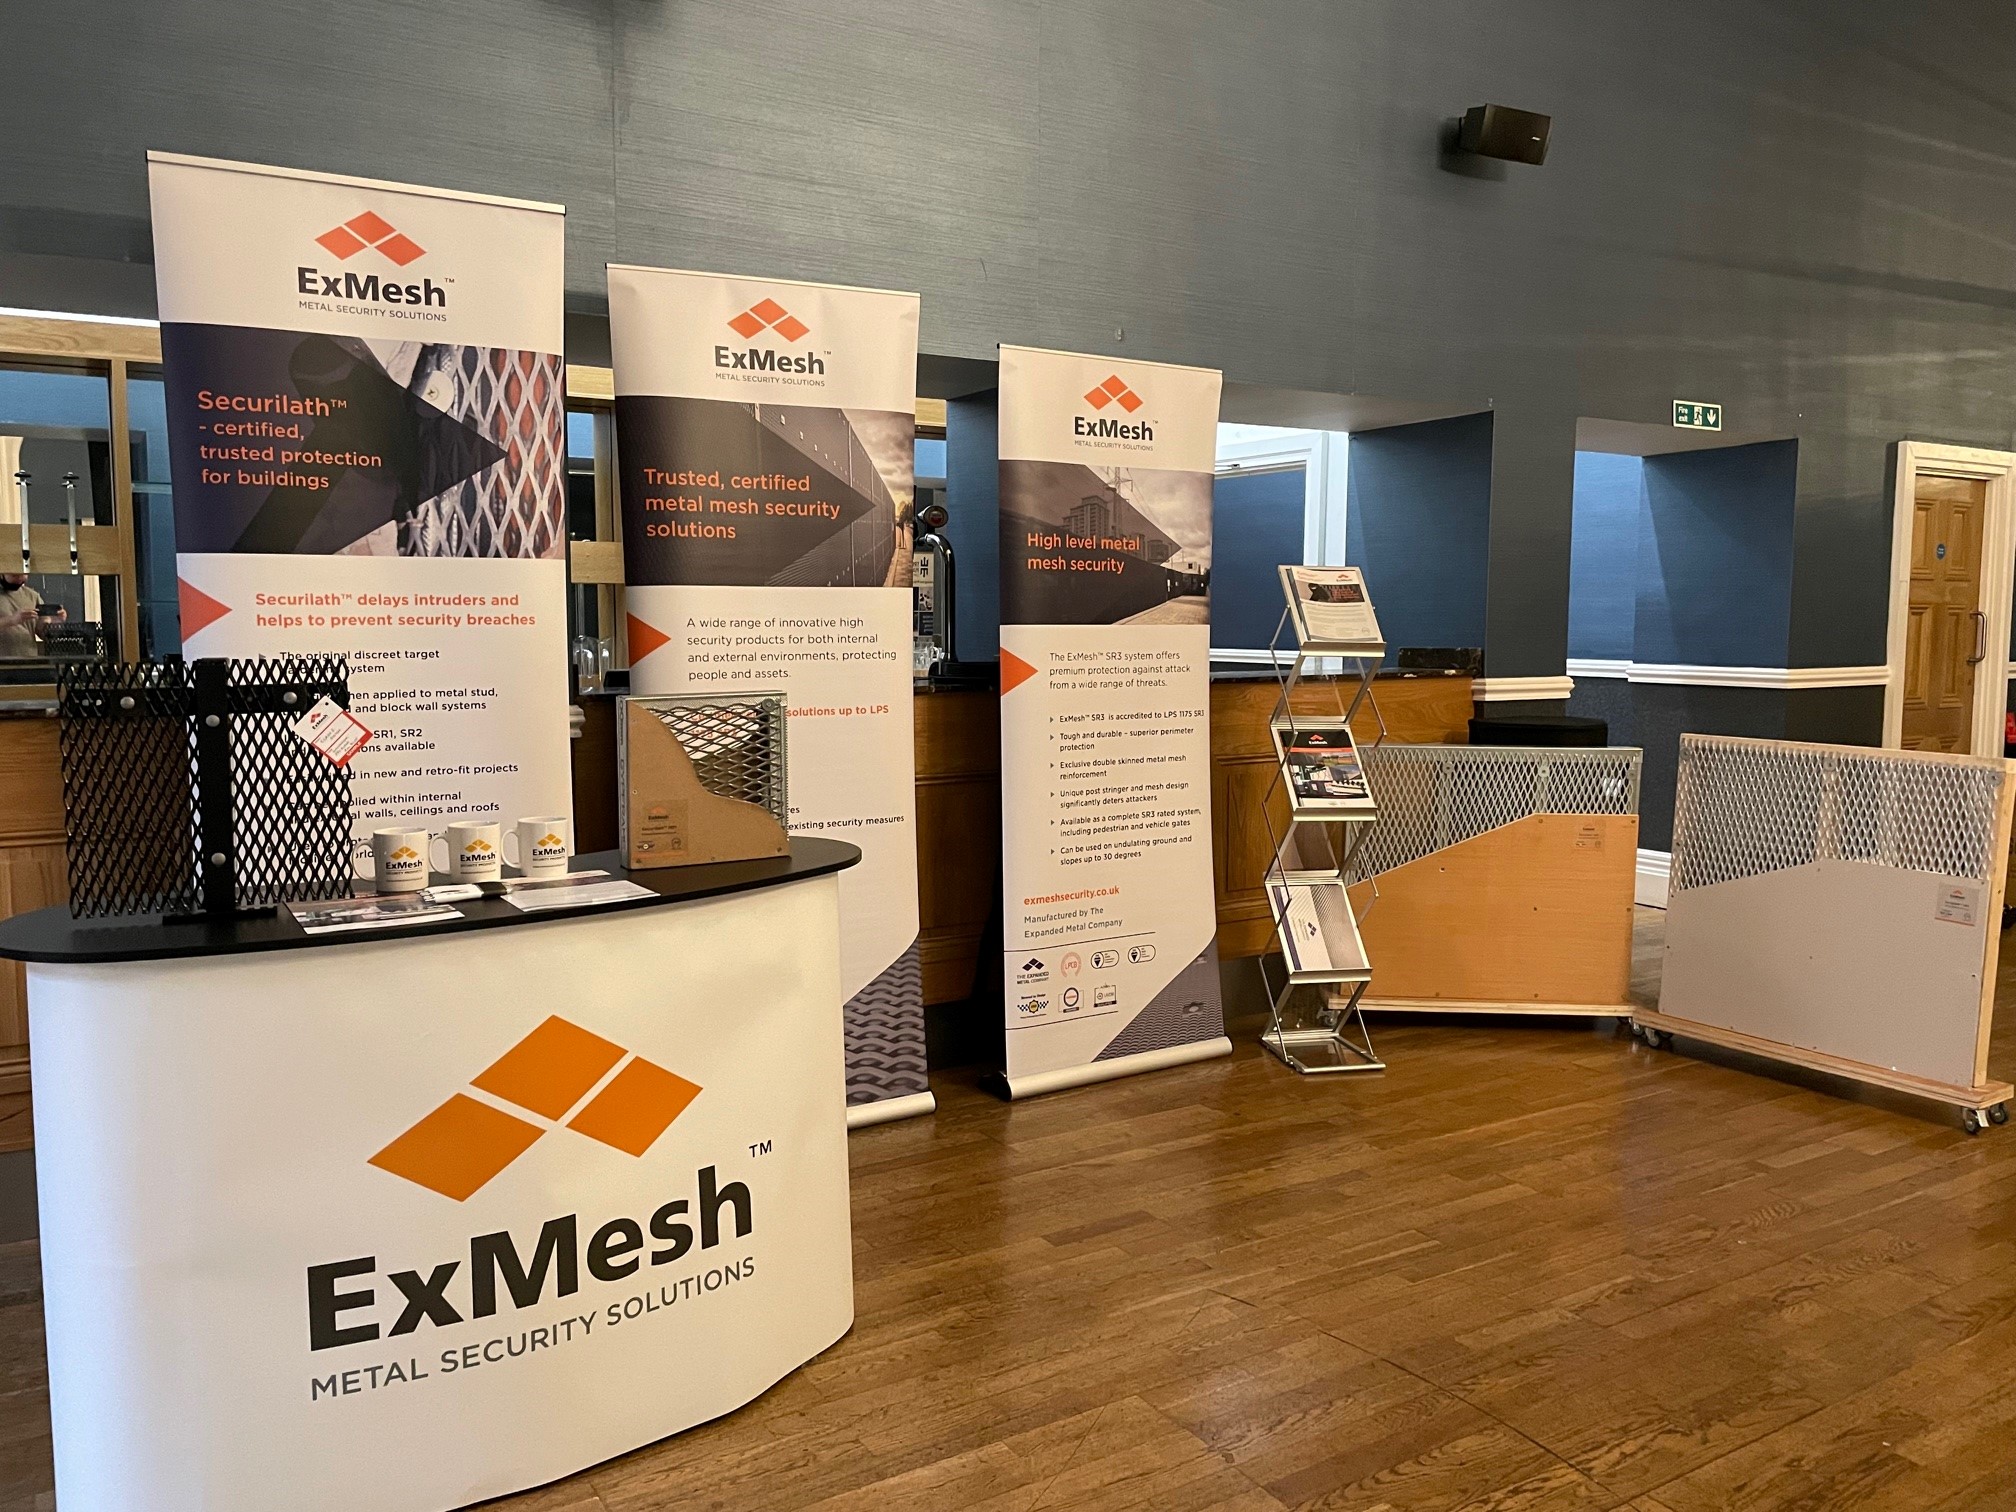 ExMesh™ shares security expertise at IAASF conference 